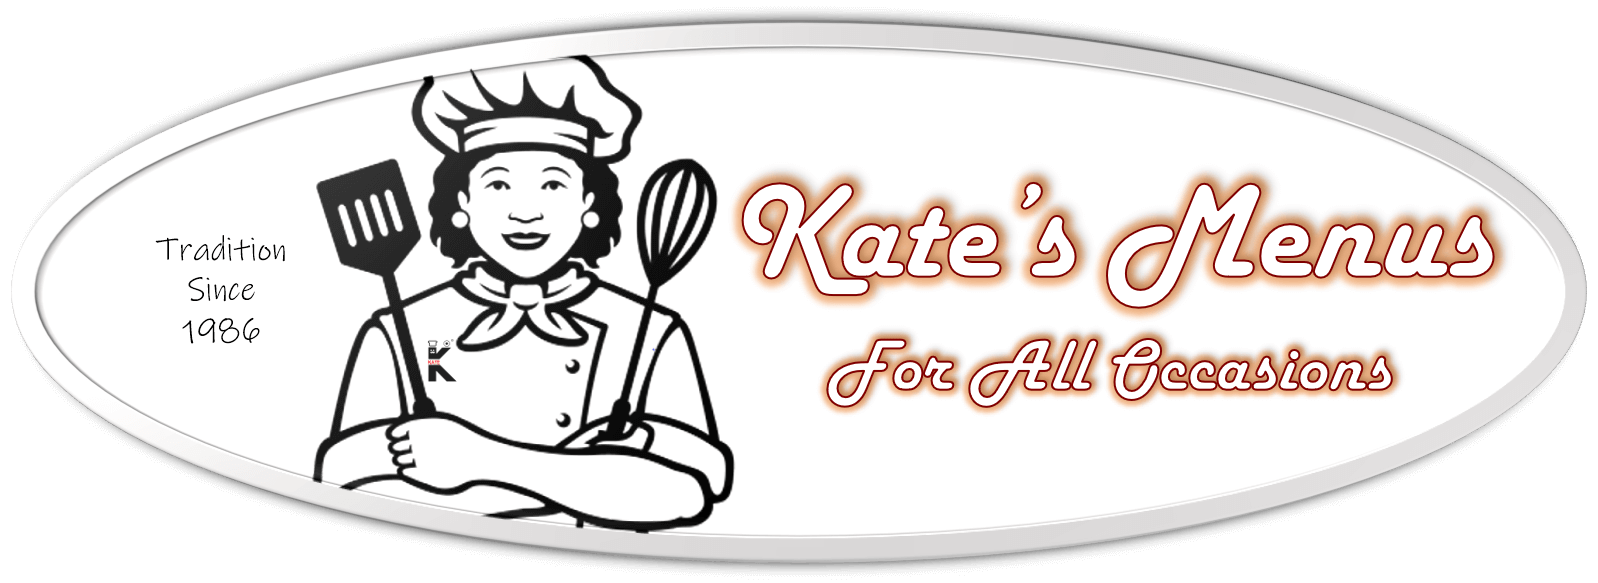 Kate's Menu For All Occasions